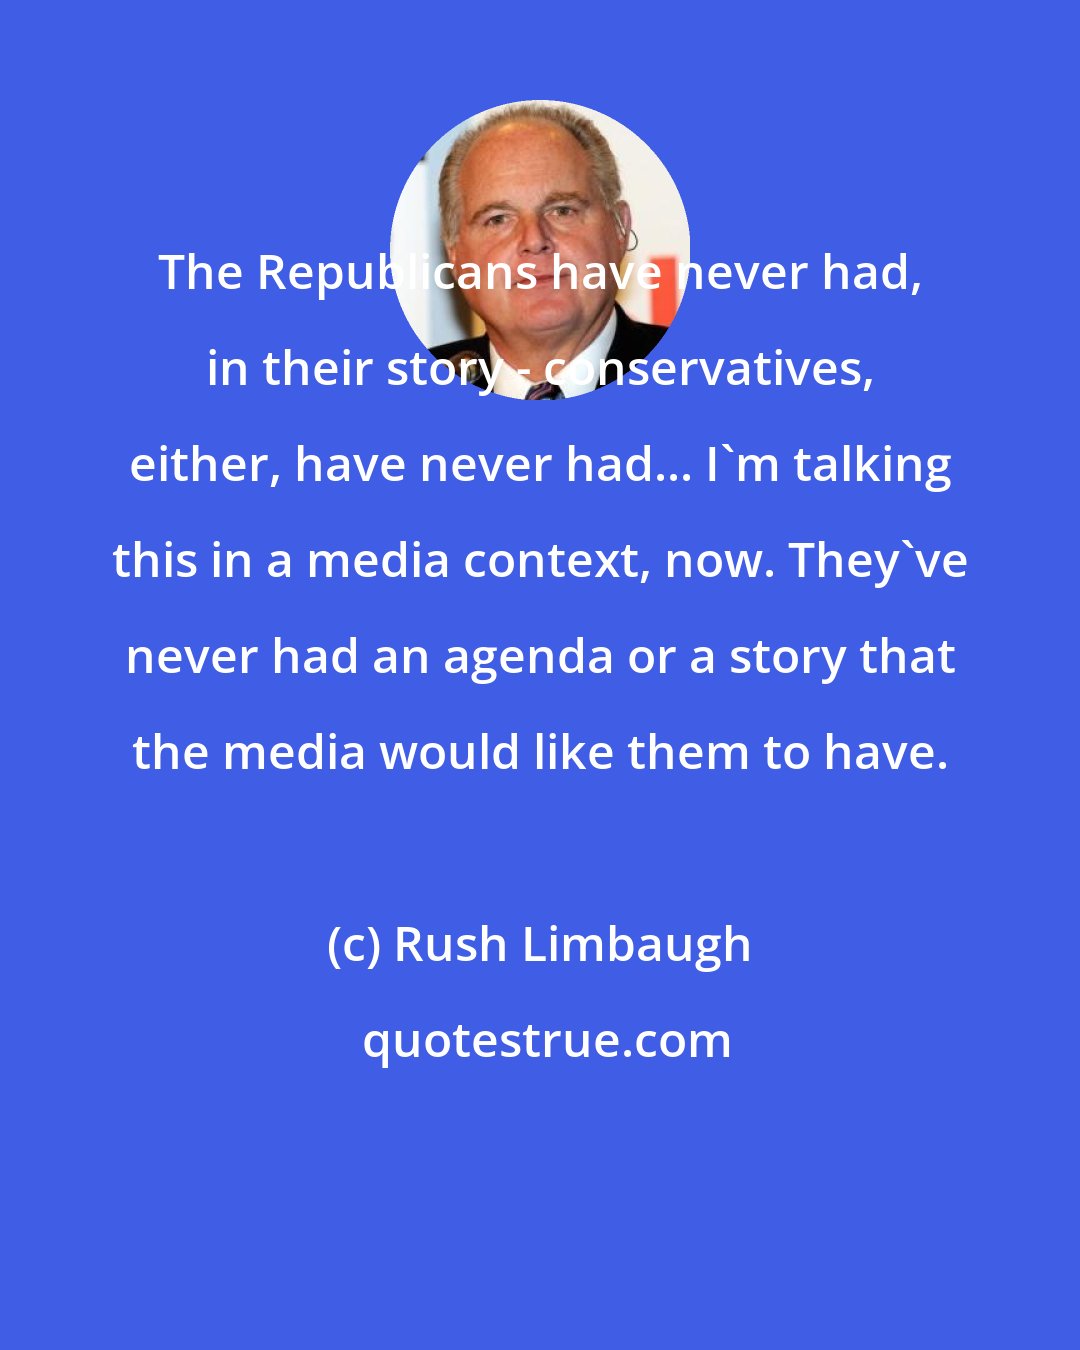 Rush Limbaugh: The Republicans have never had, in their story - conservatives, either, have never had... I'm talking this in a media context, now. They've never had an agenda or a story that the media would like them to have.